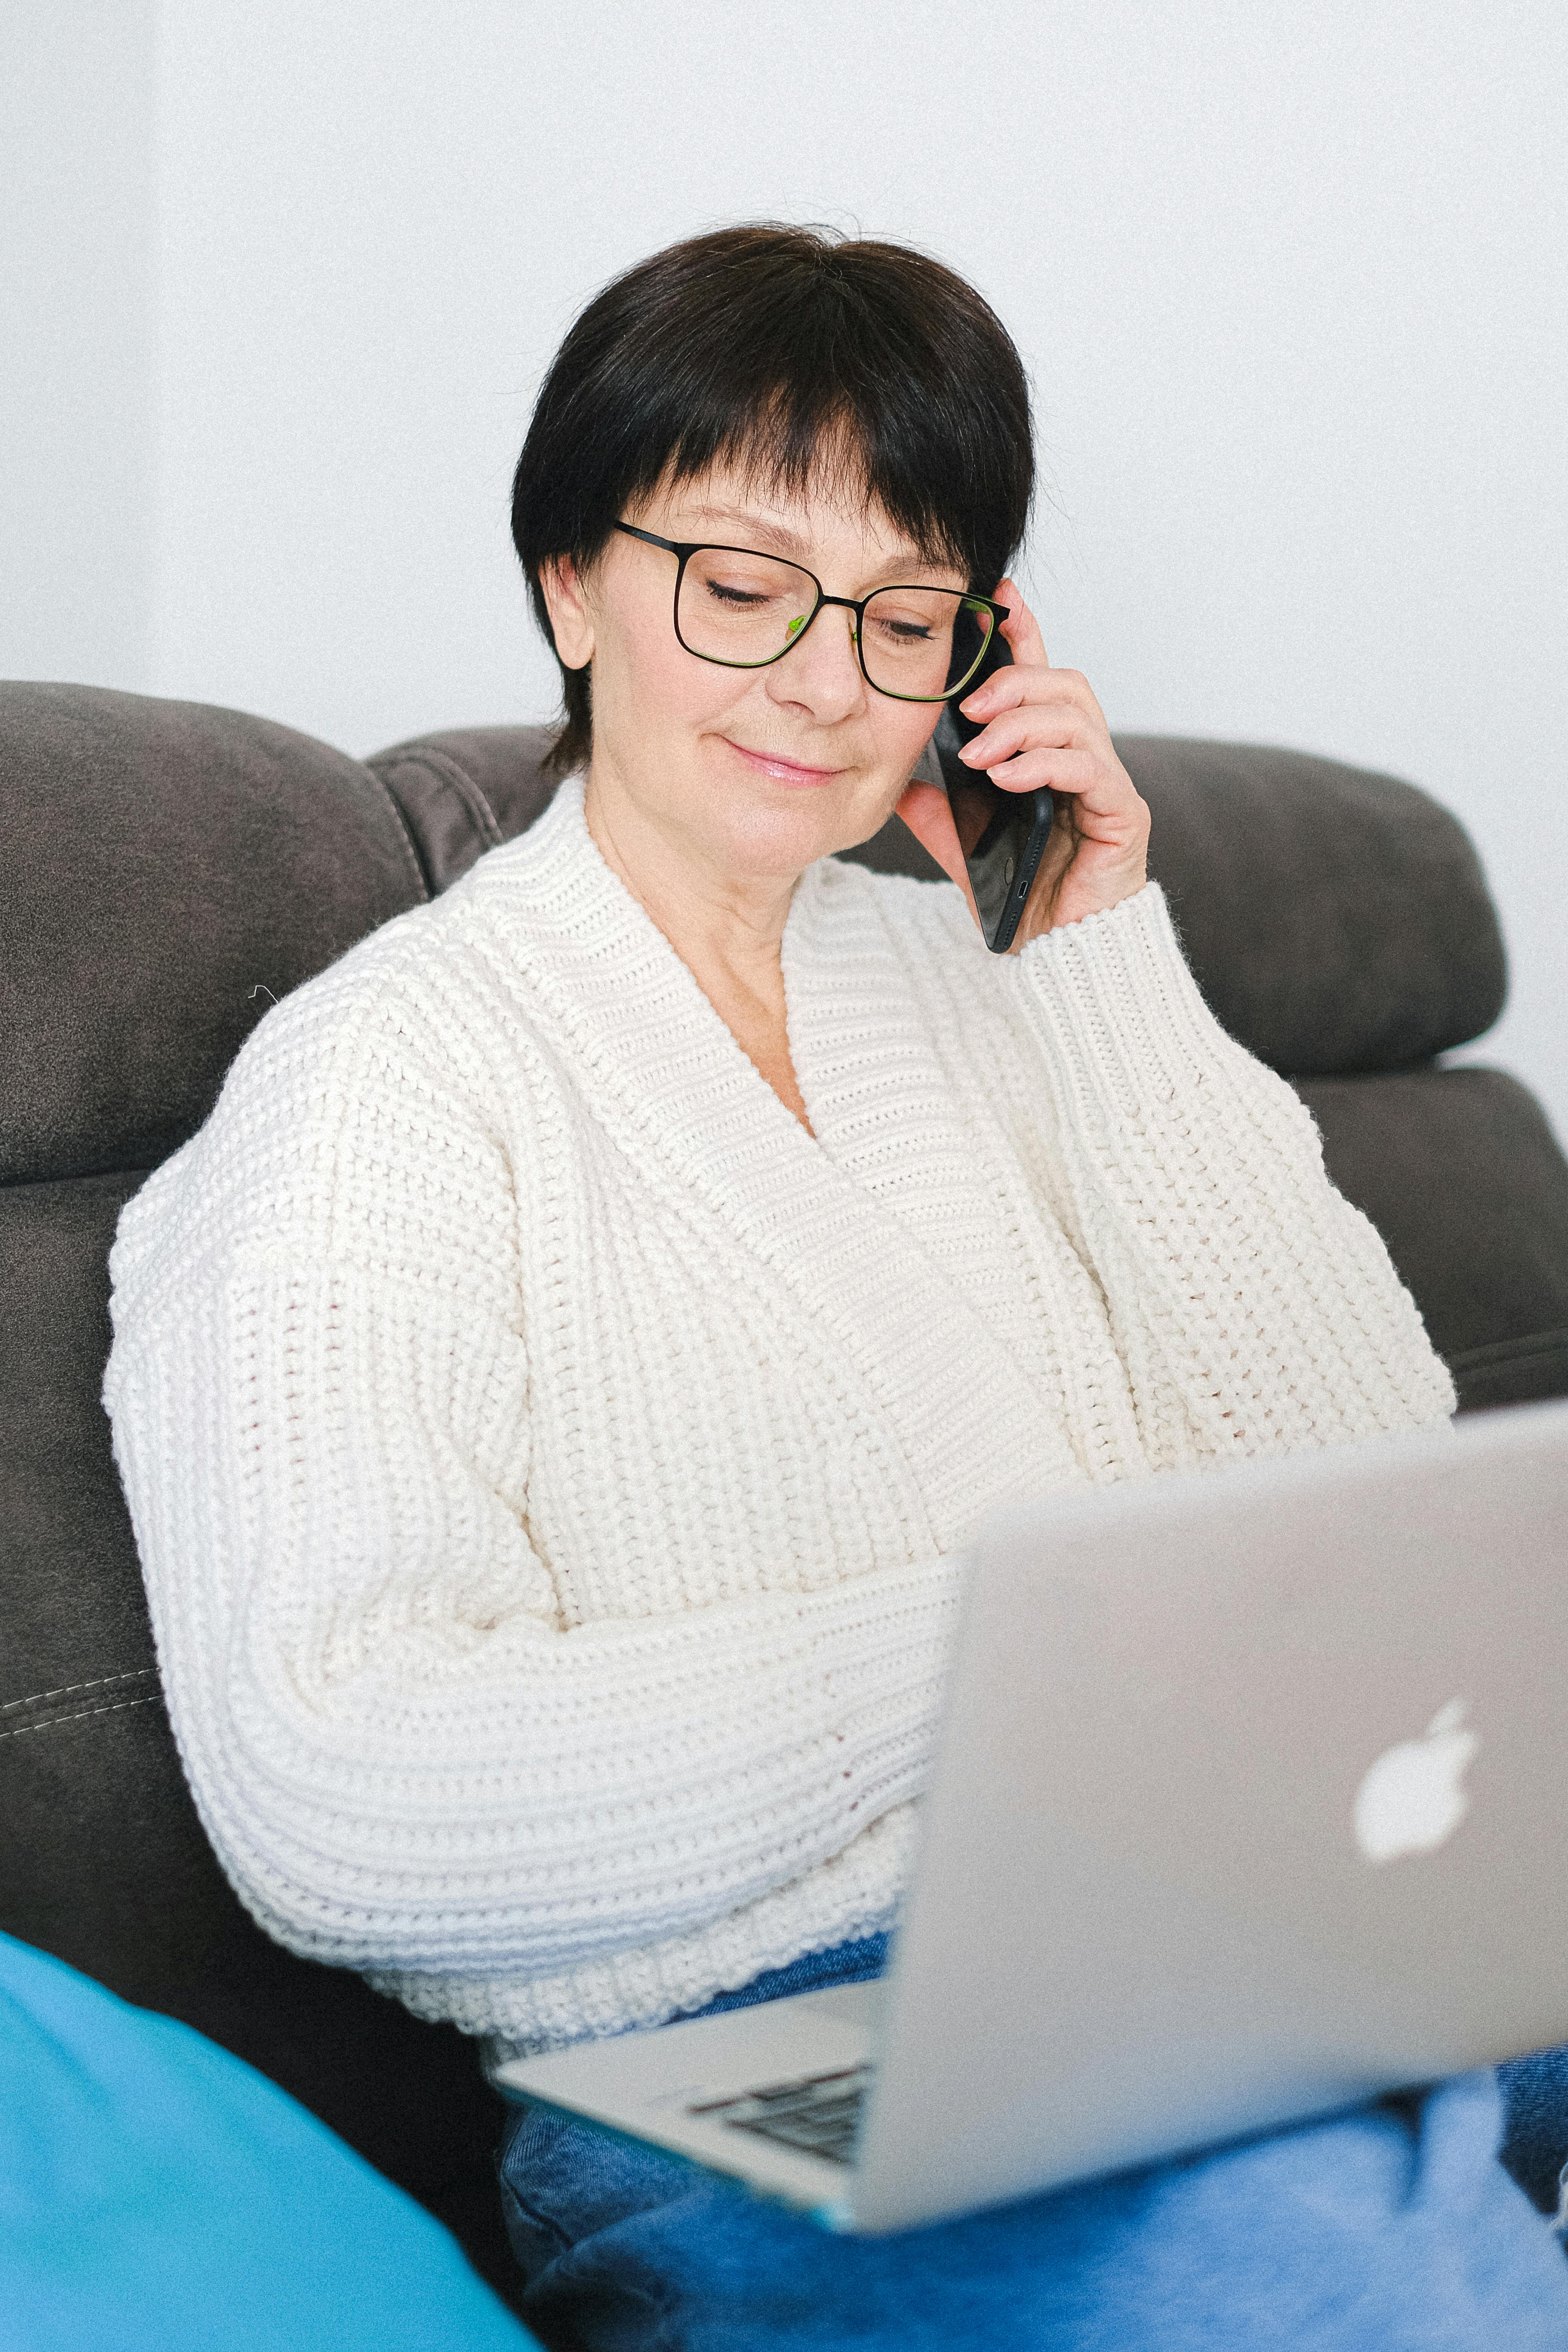 A woman smiling and talking on her phone | Source: Pexels